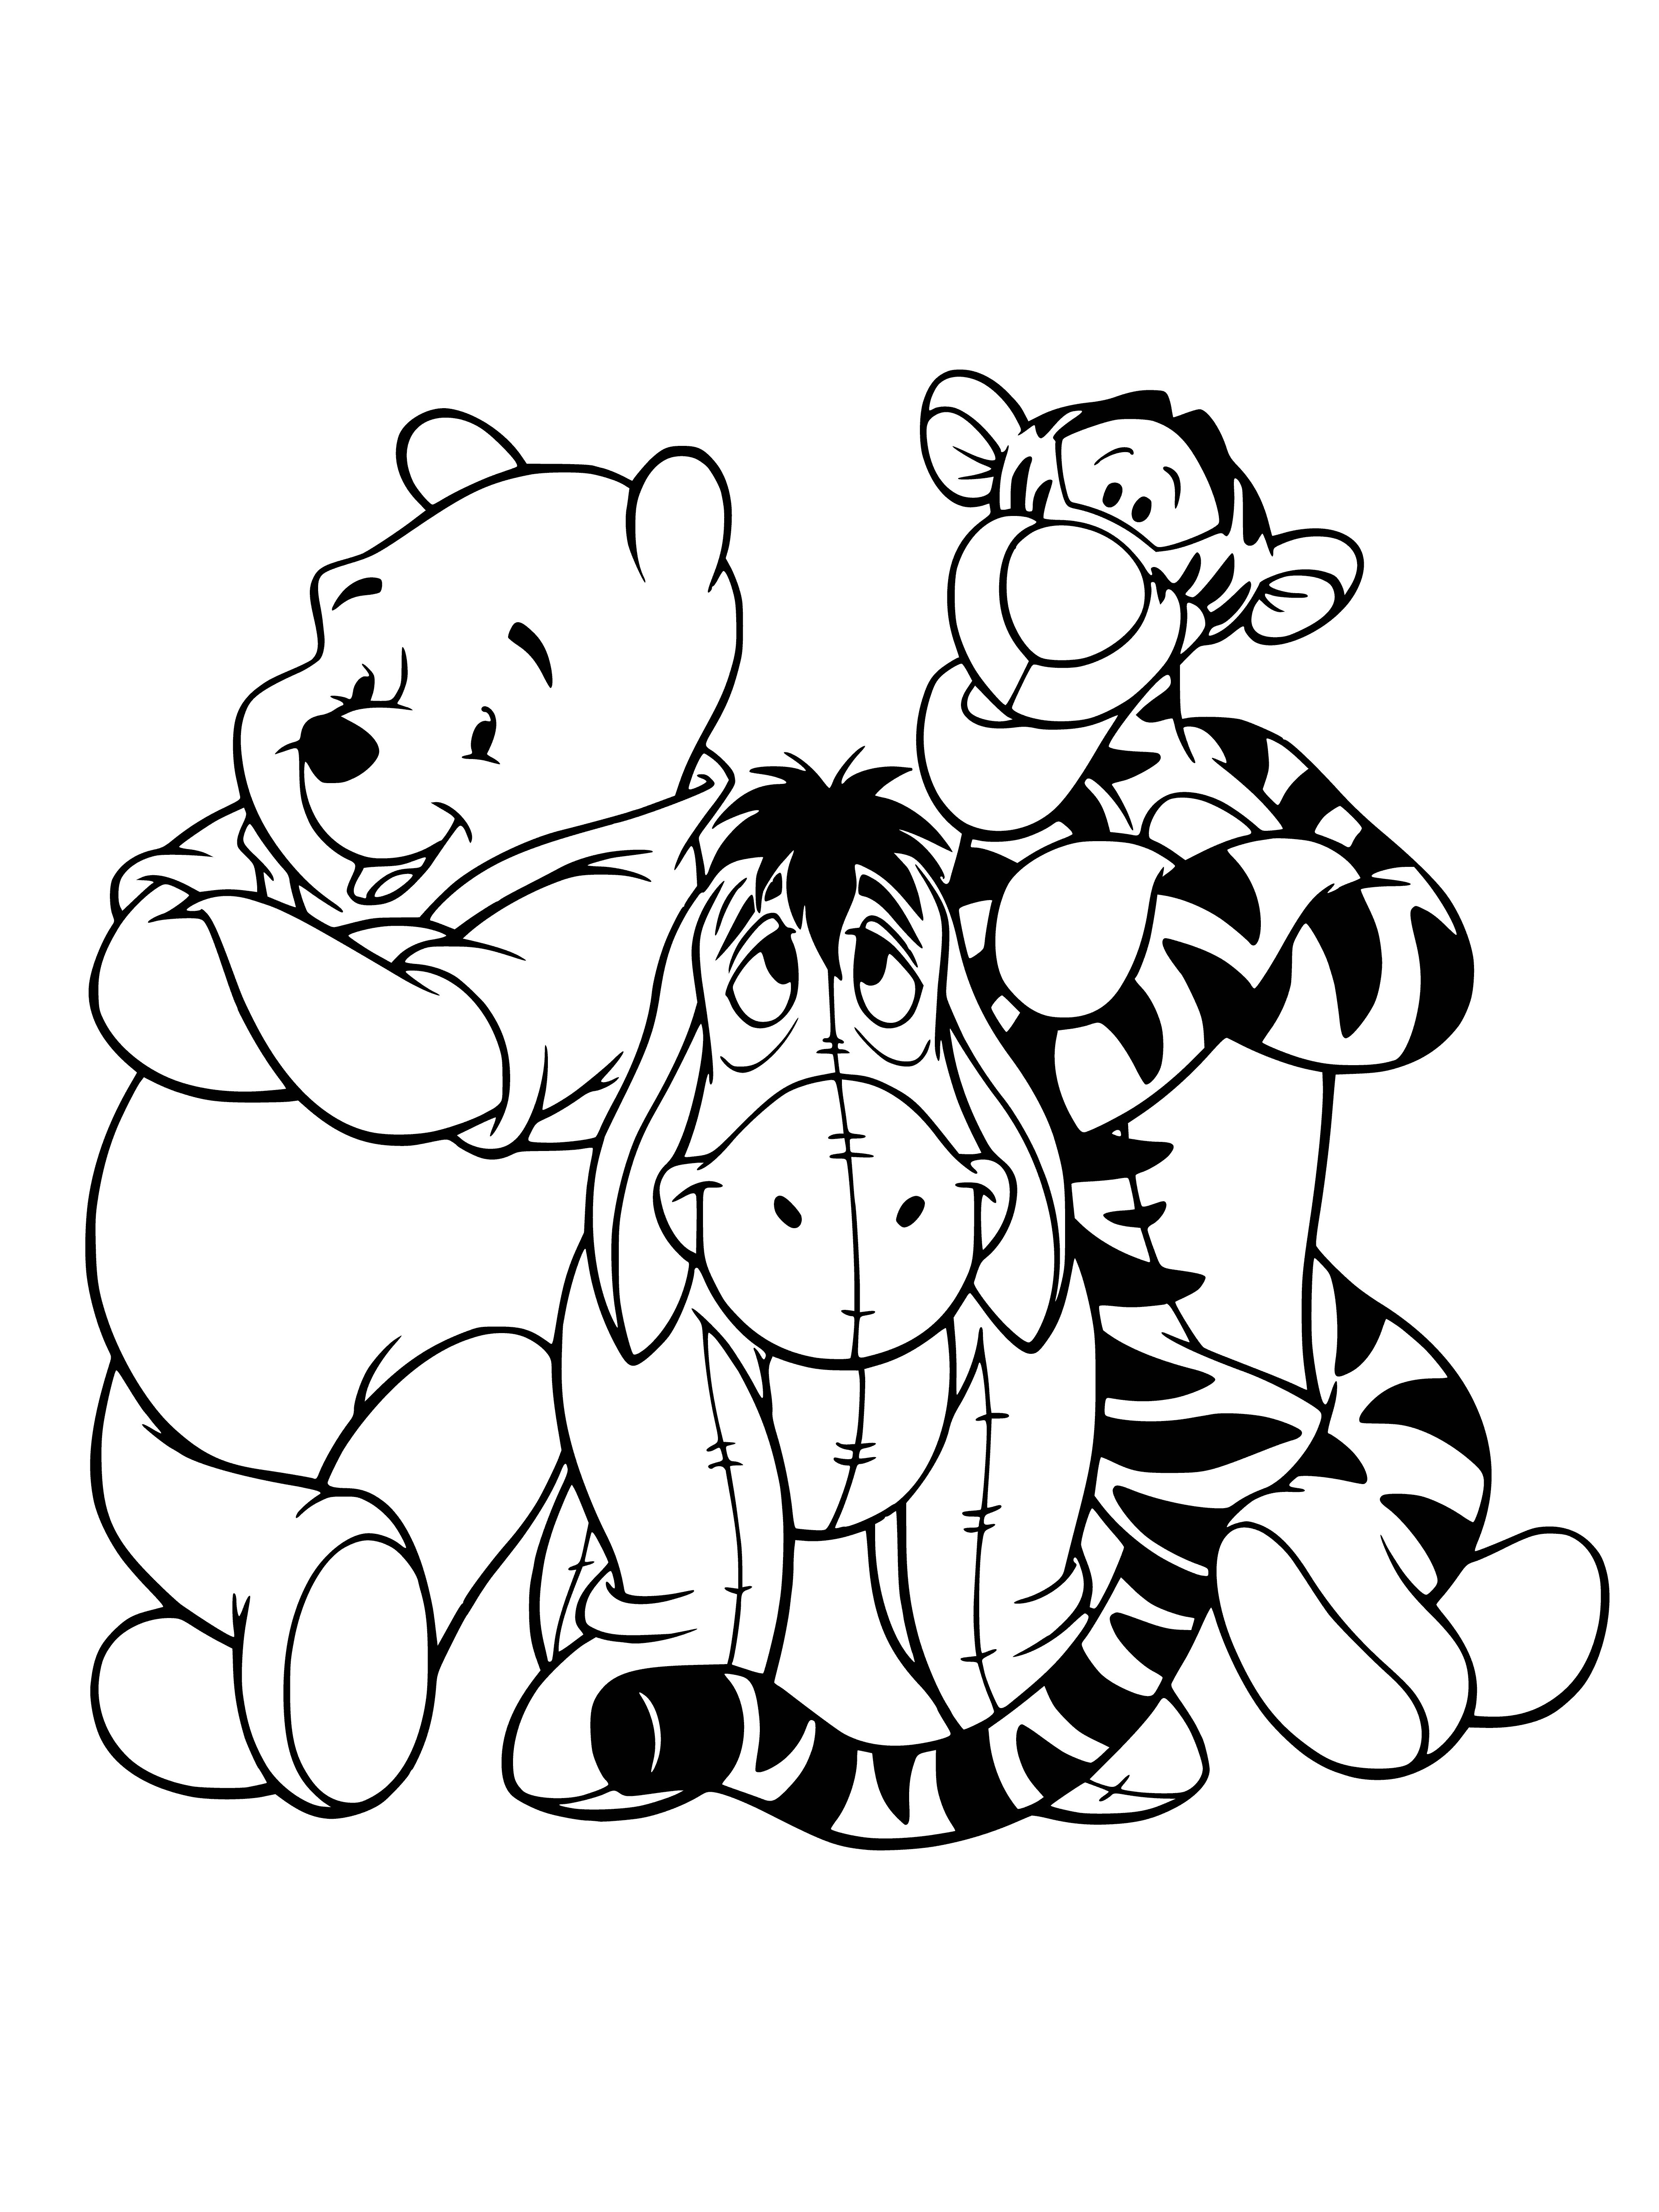 coloring page: Winnie the Pooh and his friends: Eeyore (sad) and Tigger (excited) are enjoying life together, sitting & bouncing around in their signature colors.